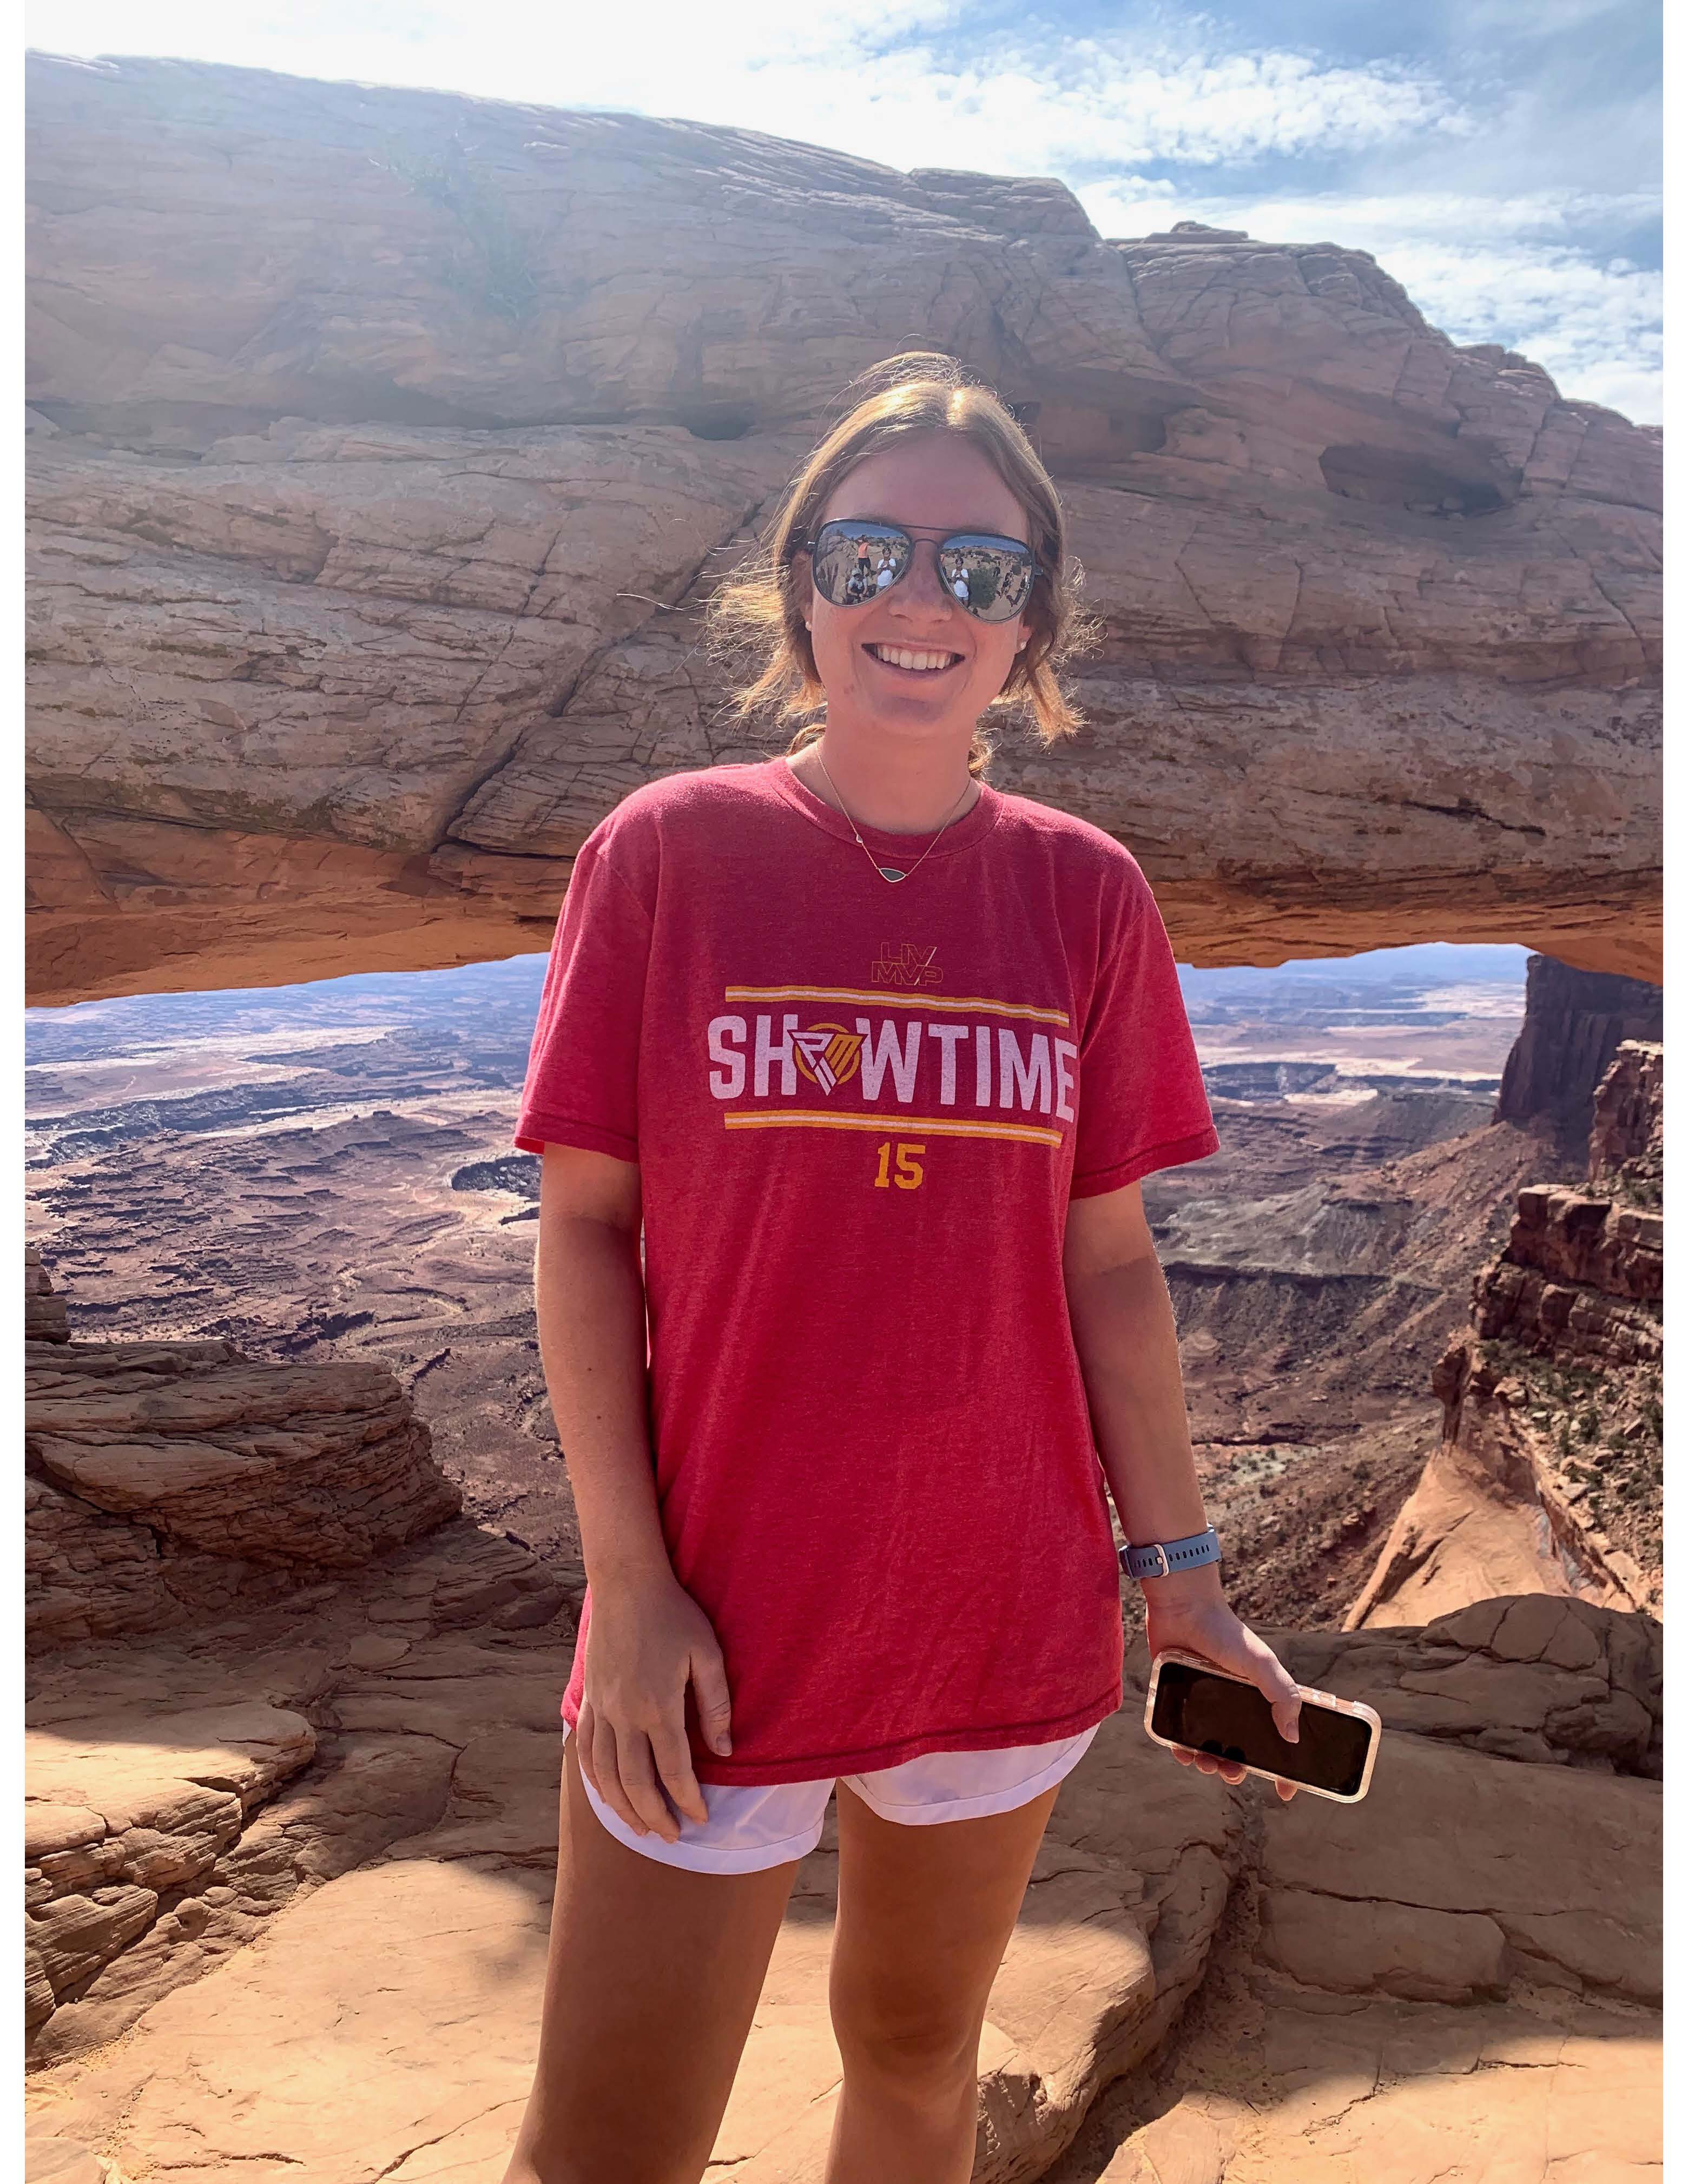 Lauren Bays stands in front of a desert canyon. She is dressed for hiking and wearing sunglasses.